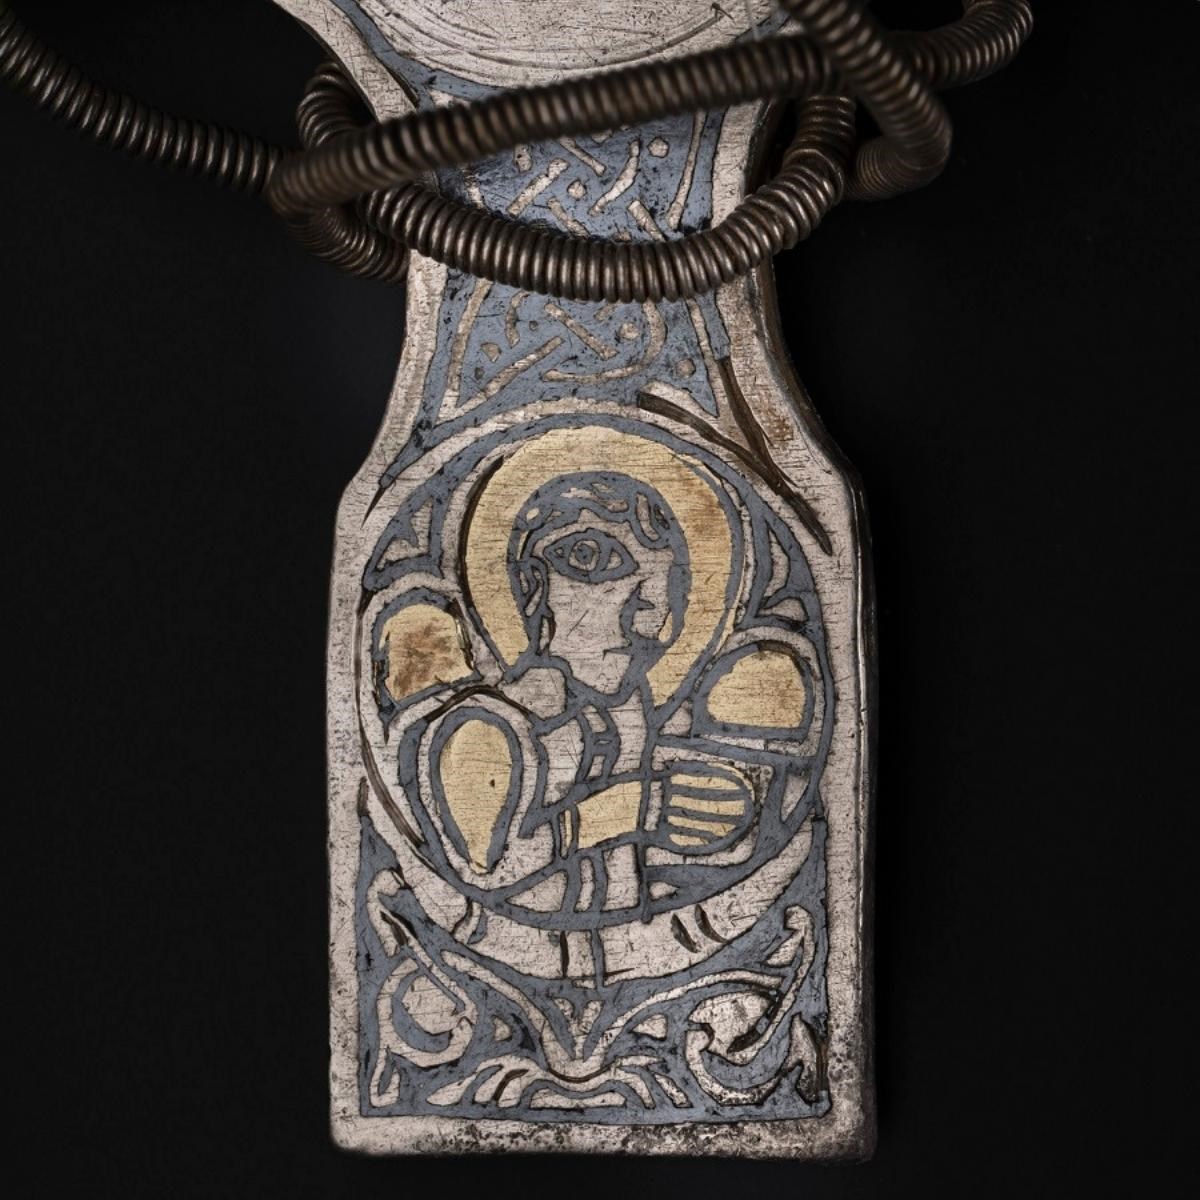 Closeup of lower arm of the cross. A saintly figure outlined in black draws the eye, sporting a golden halo and surrounded by naturalistic patterns.